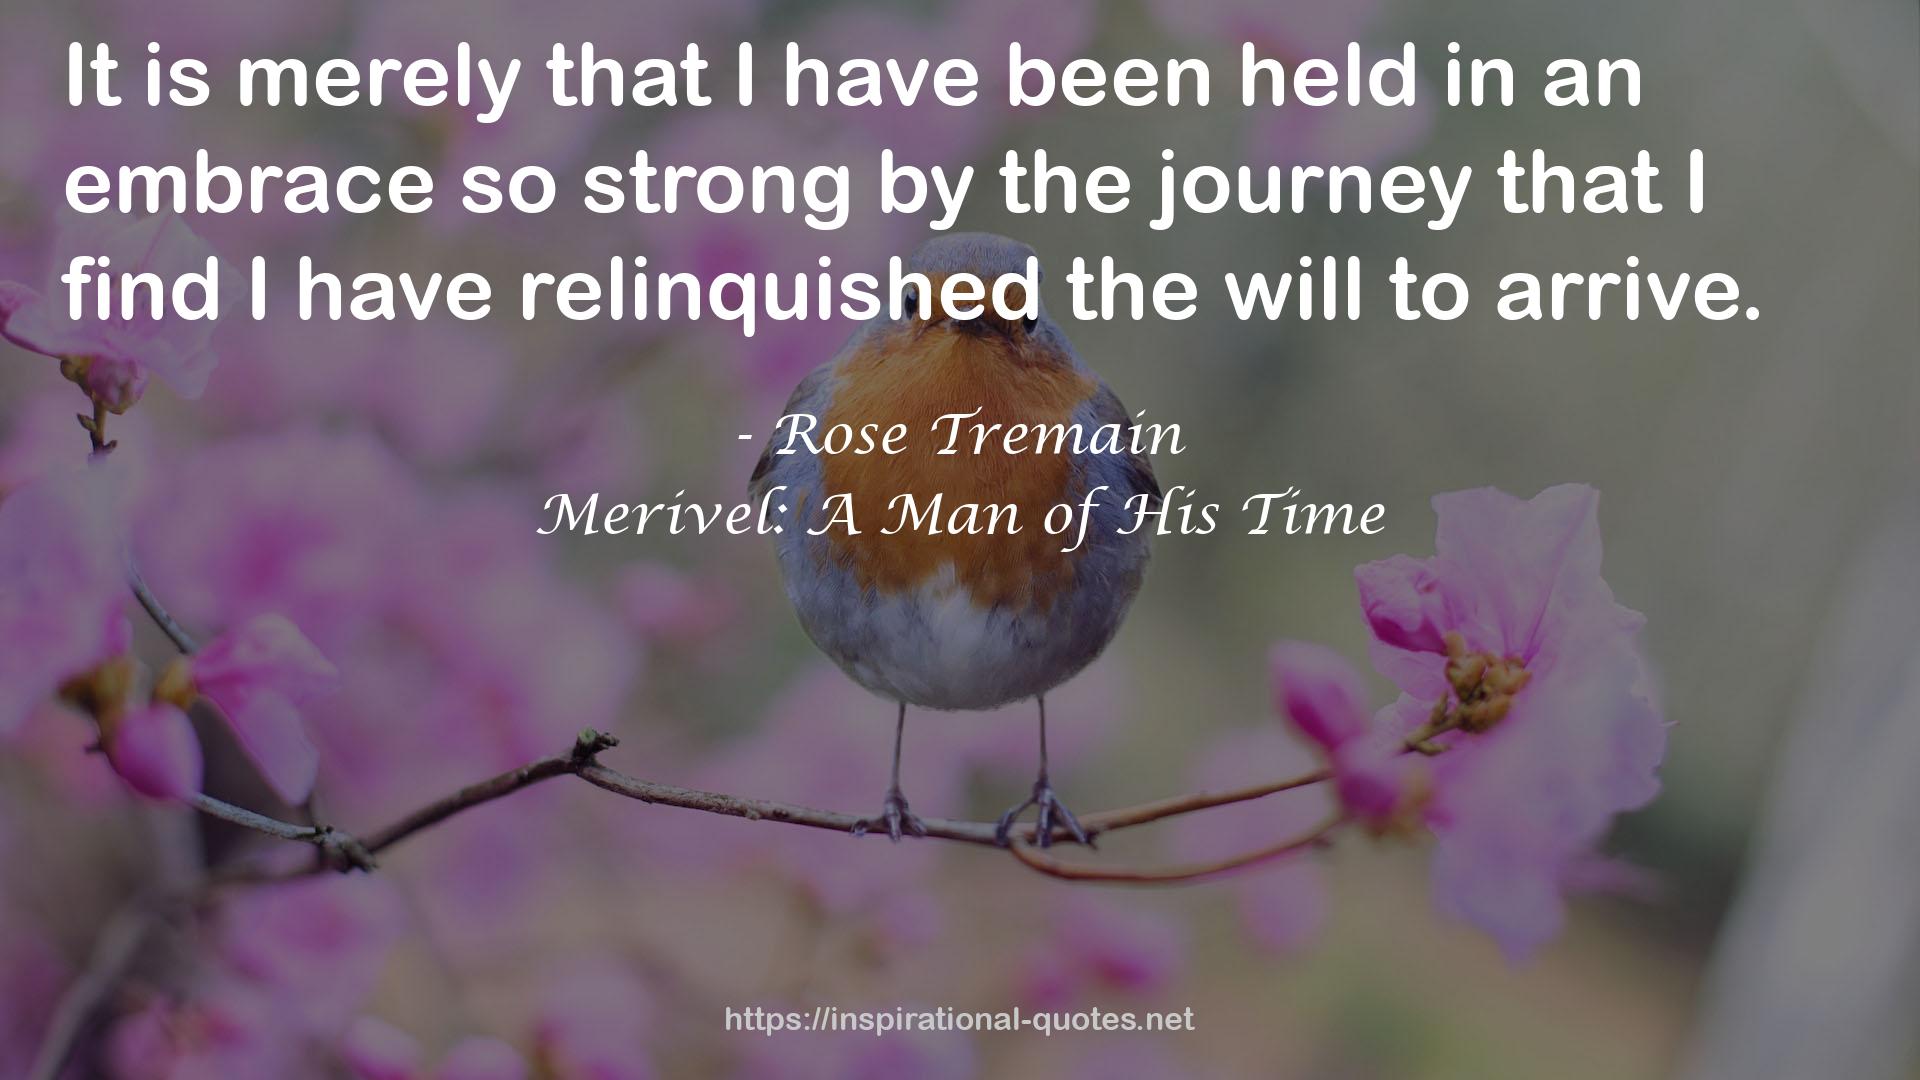 Merivel: A Man of His Time QUOTES